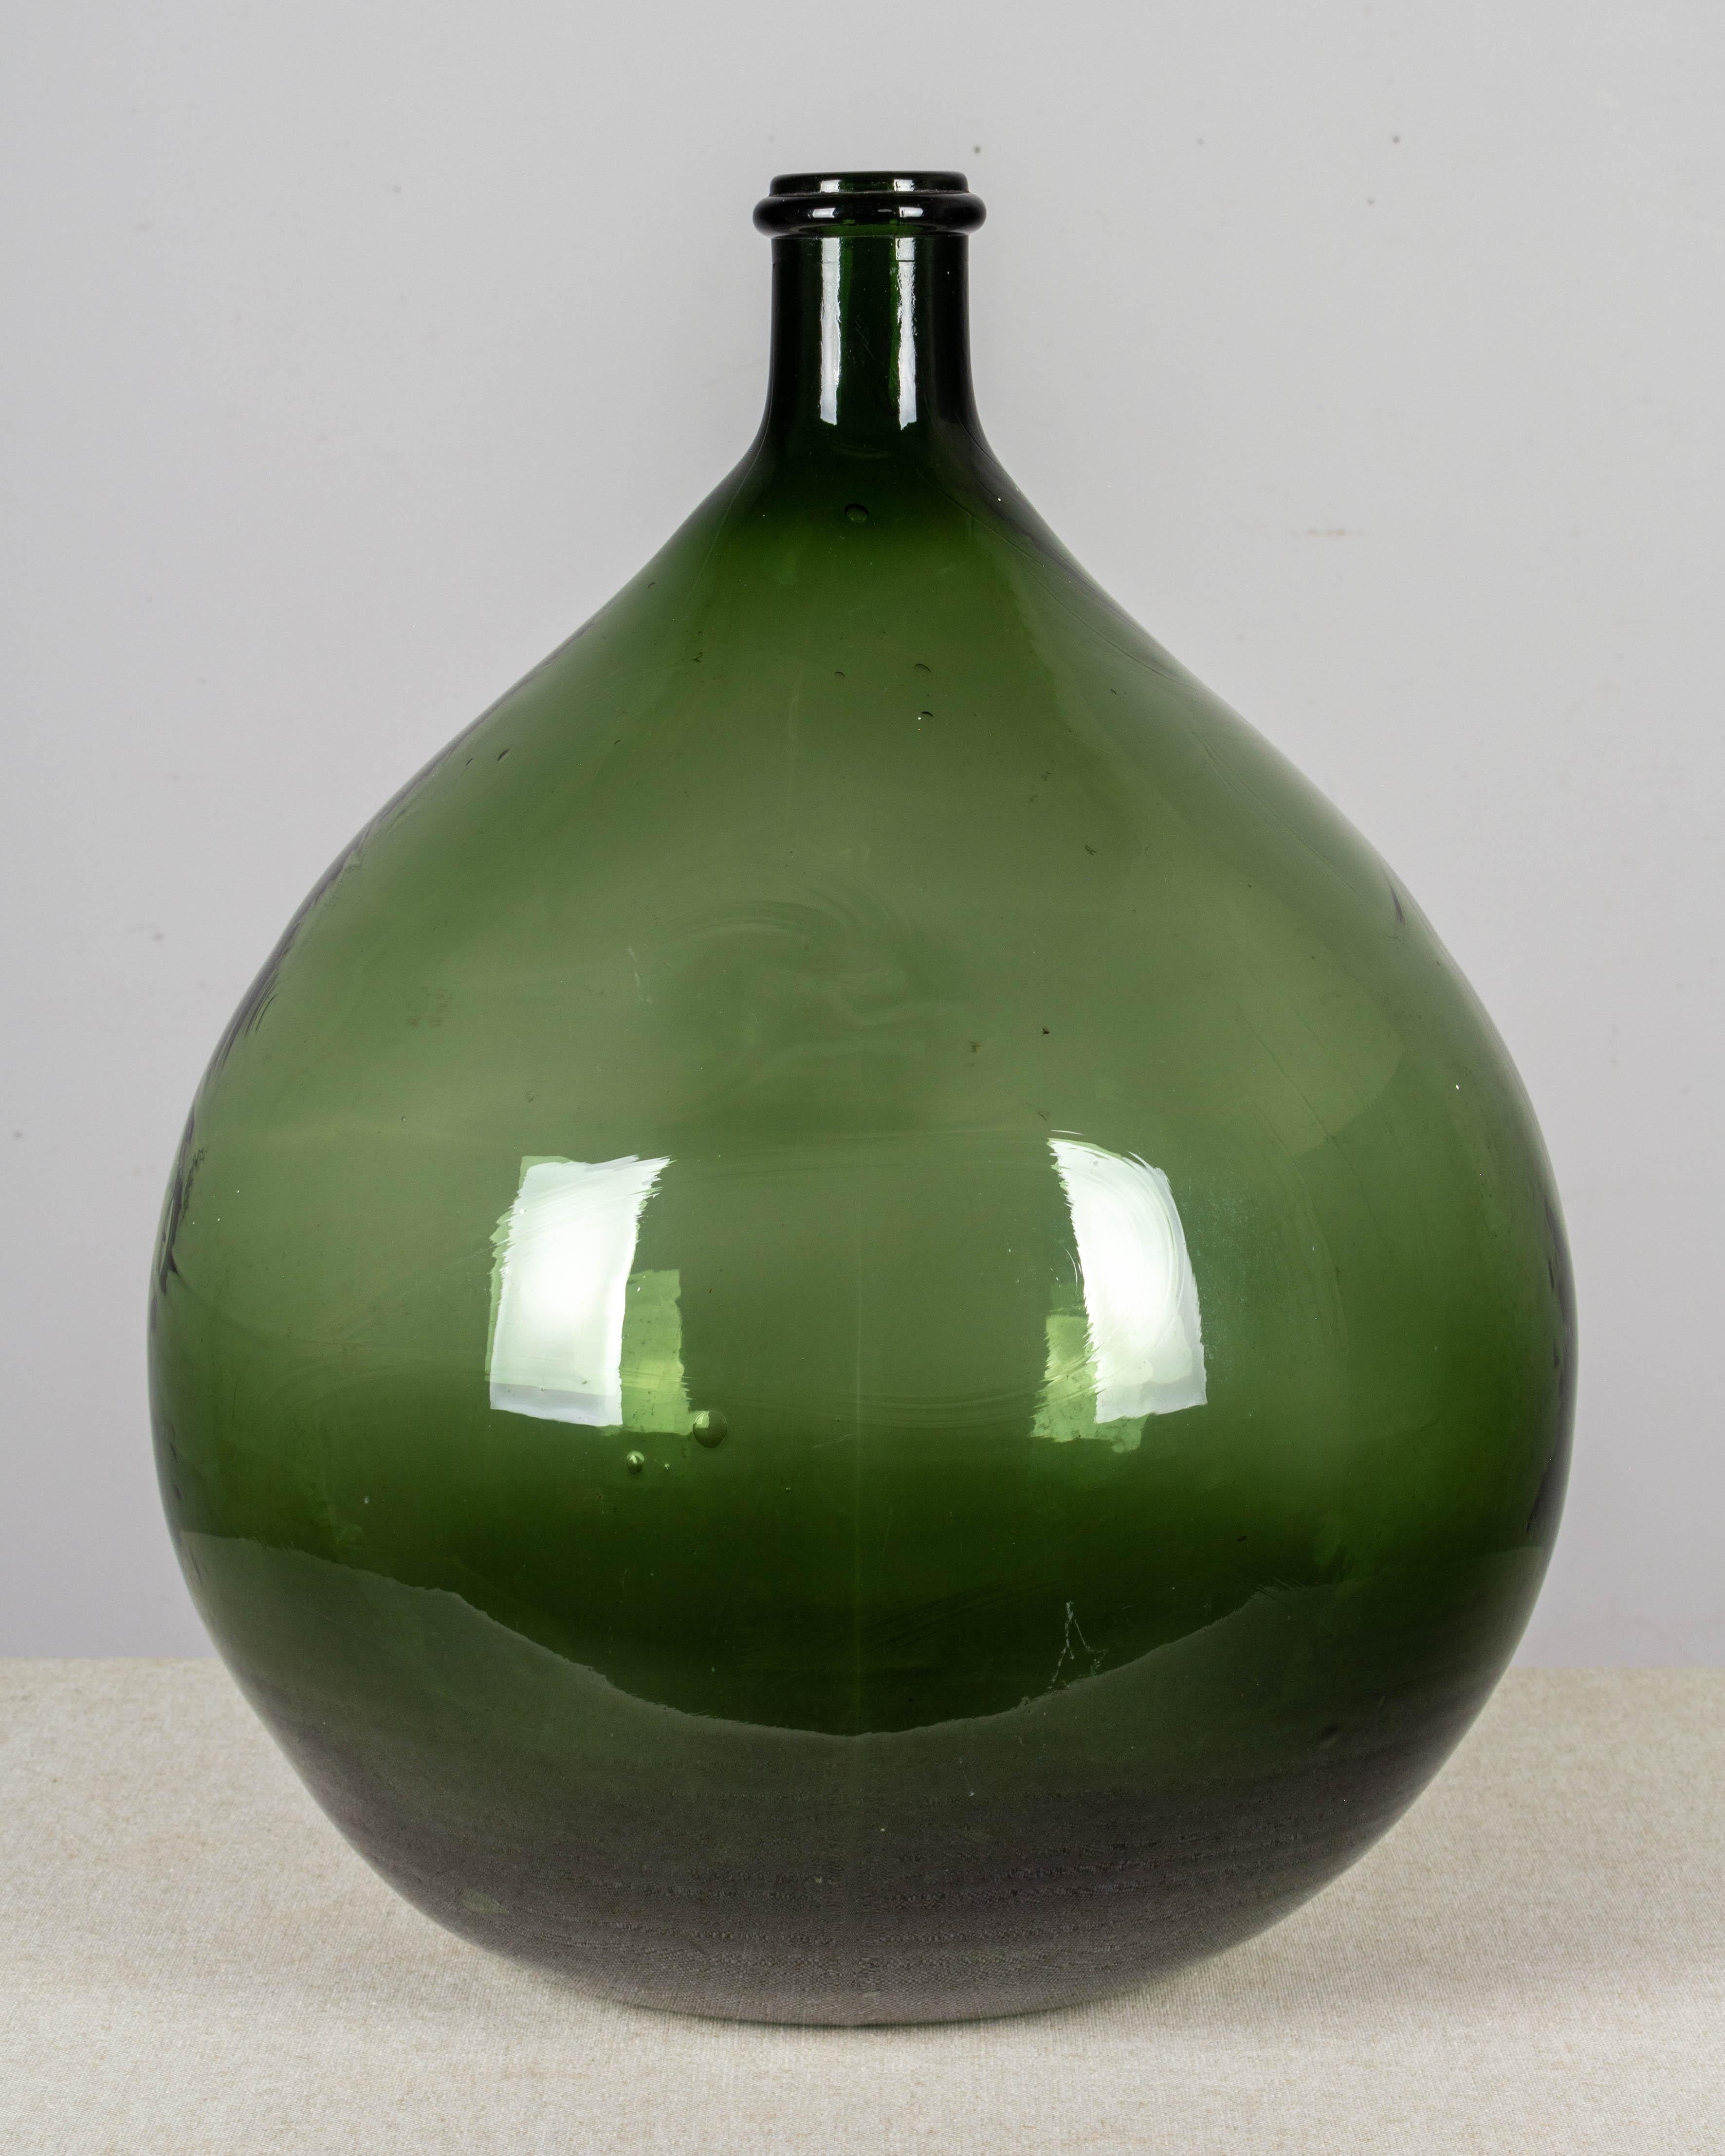 A large 19th century French globular form hand blown green glass dame Jeanne, or demijohn bottle. Capacity: 25 liters. Weight: 9 lbs.